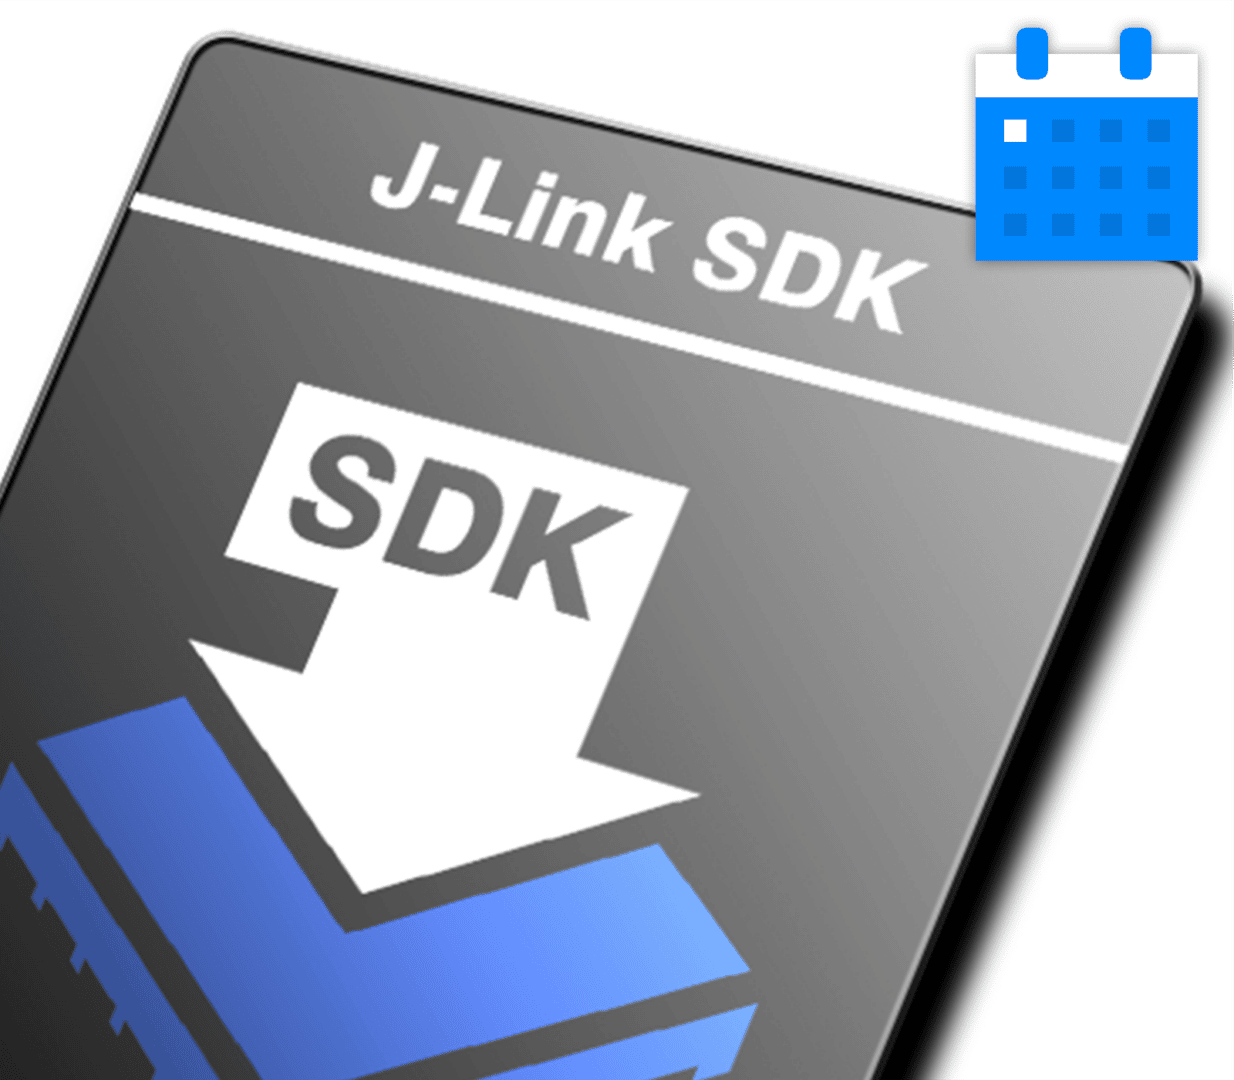 SEGGER J-Link SDK Update and Support Agreement